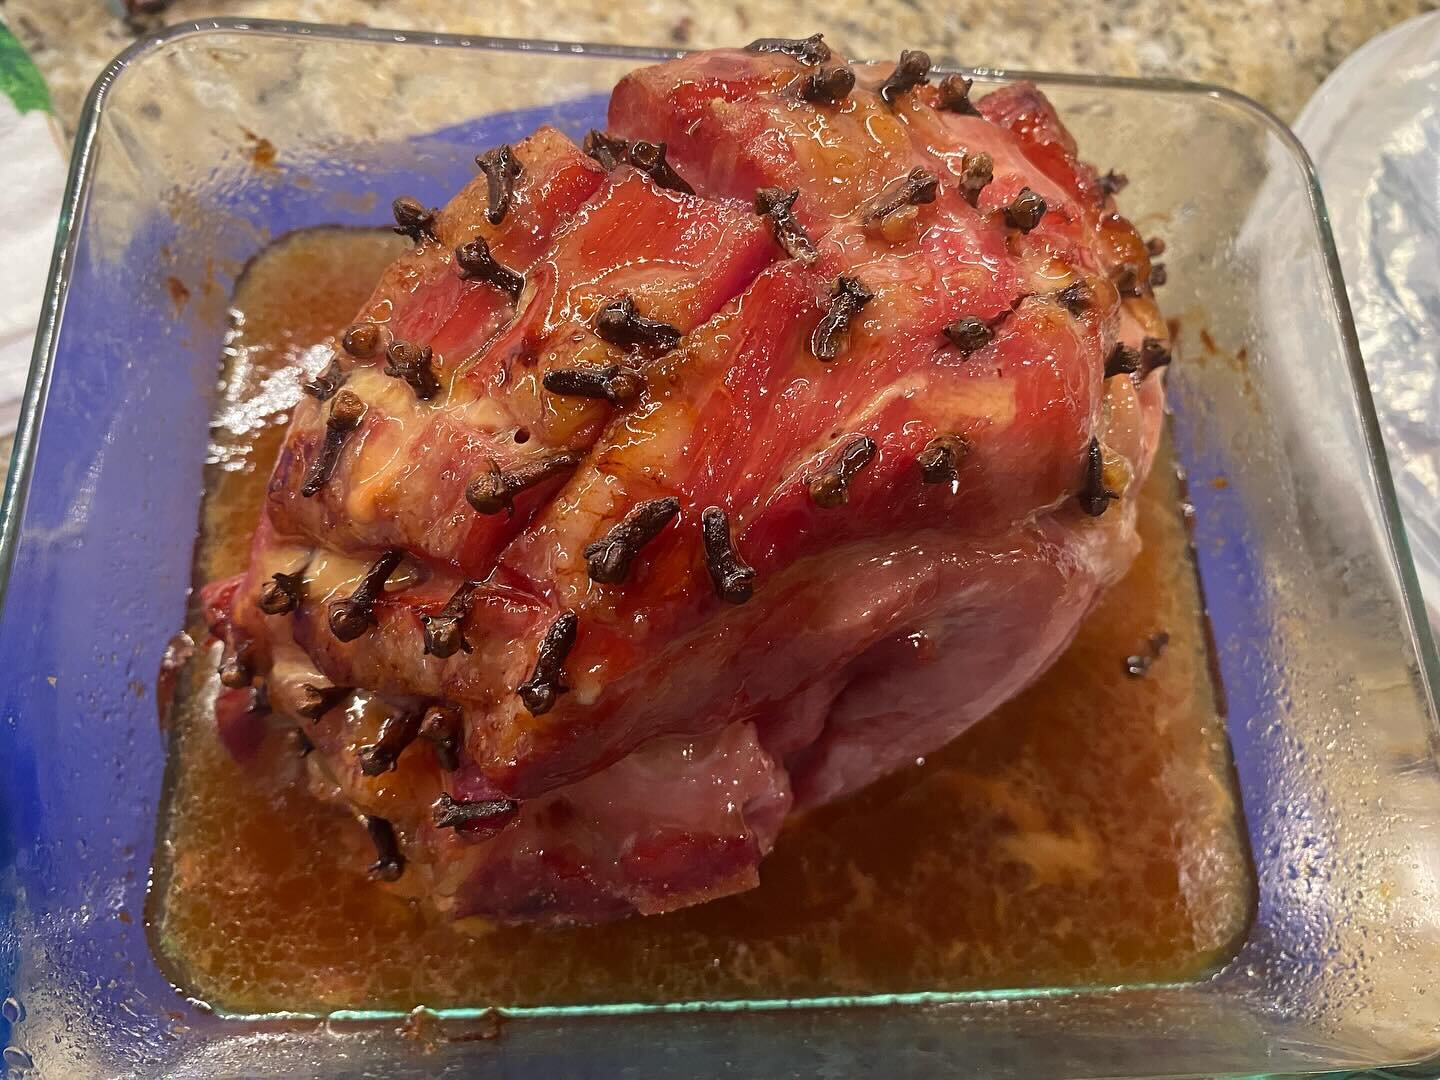 There is no comparison between store bought and pasture raised ham.  We had pasture raised brown sugar cured ham with brown sugar and honey glaze for Christmas eve lunch.